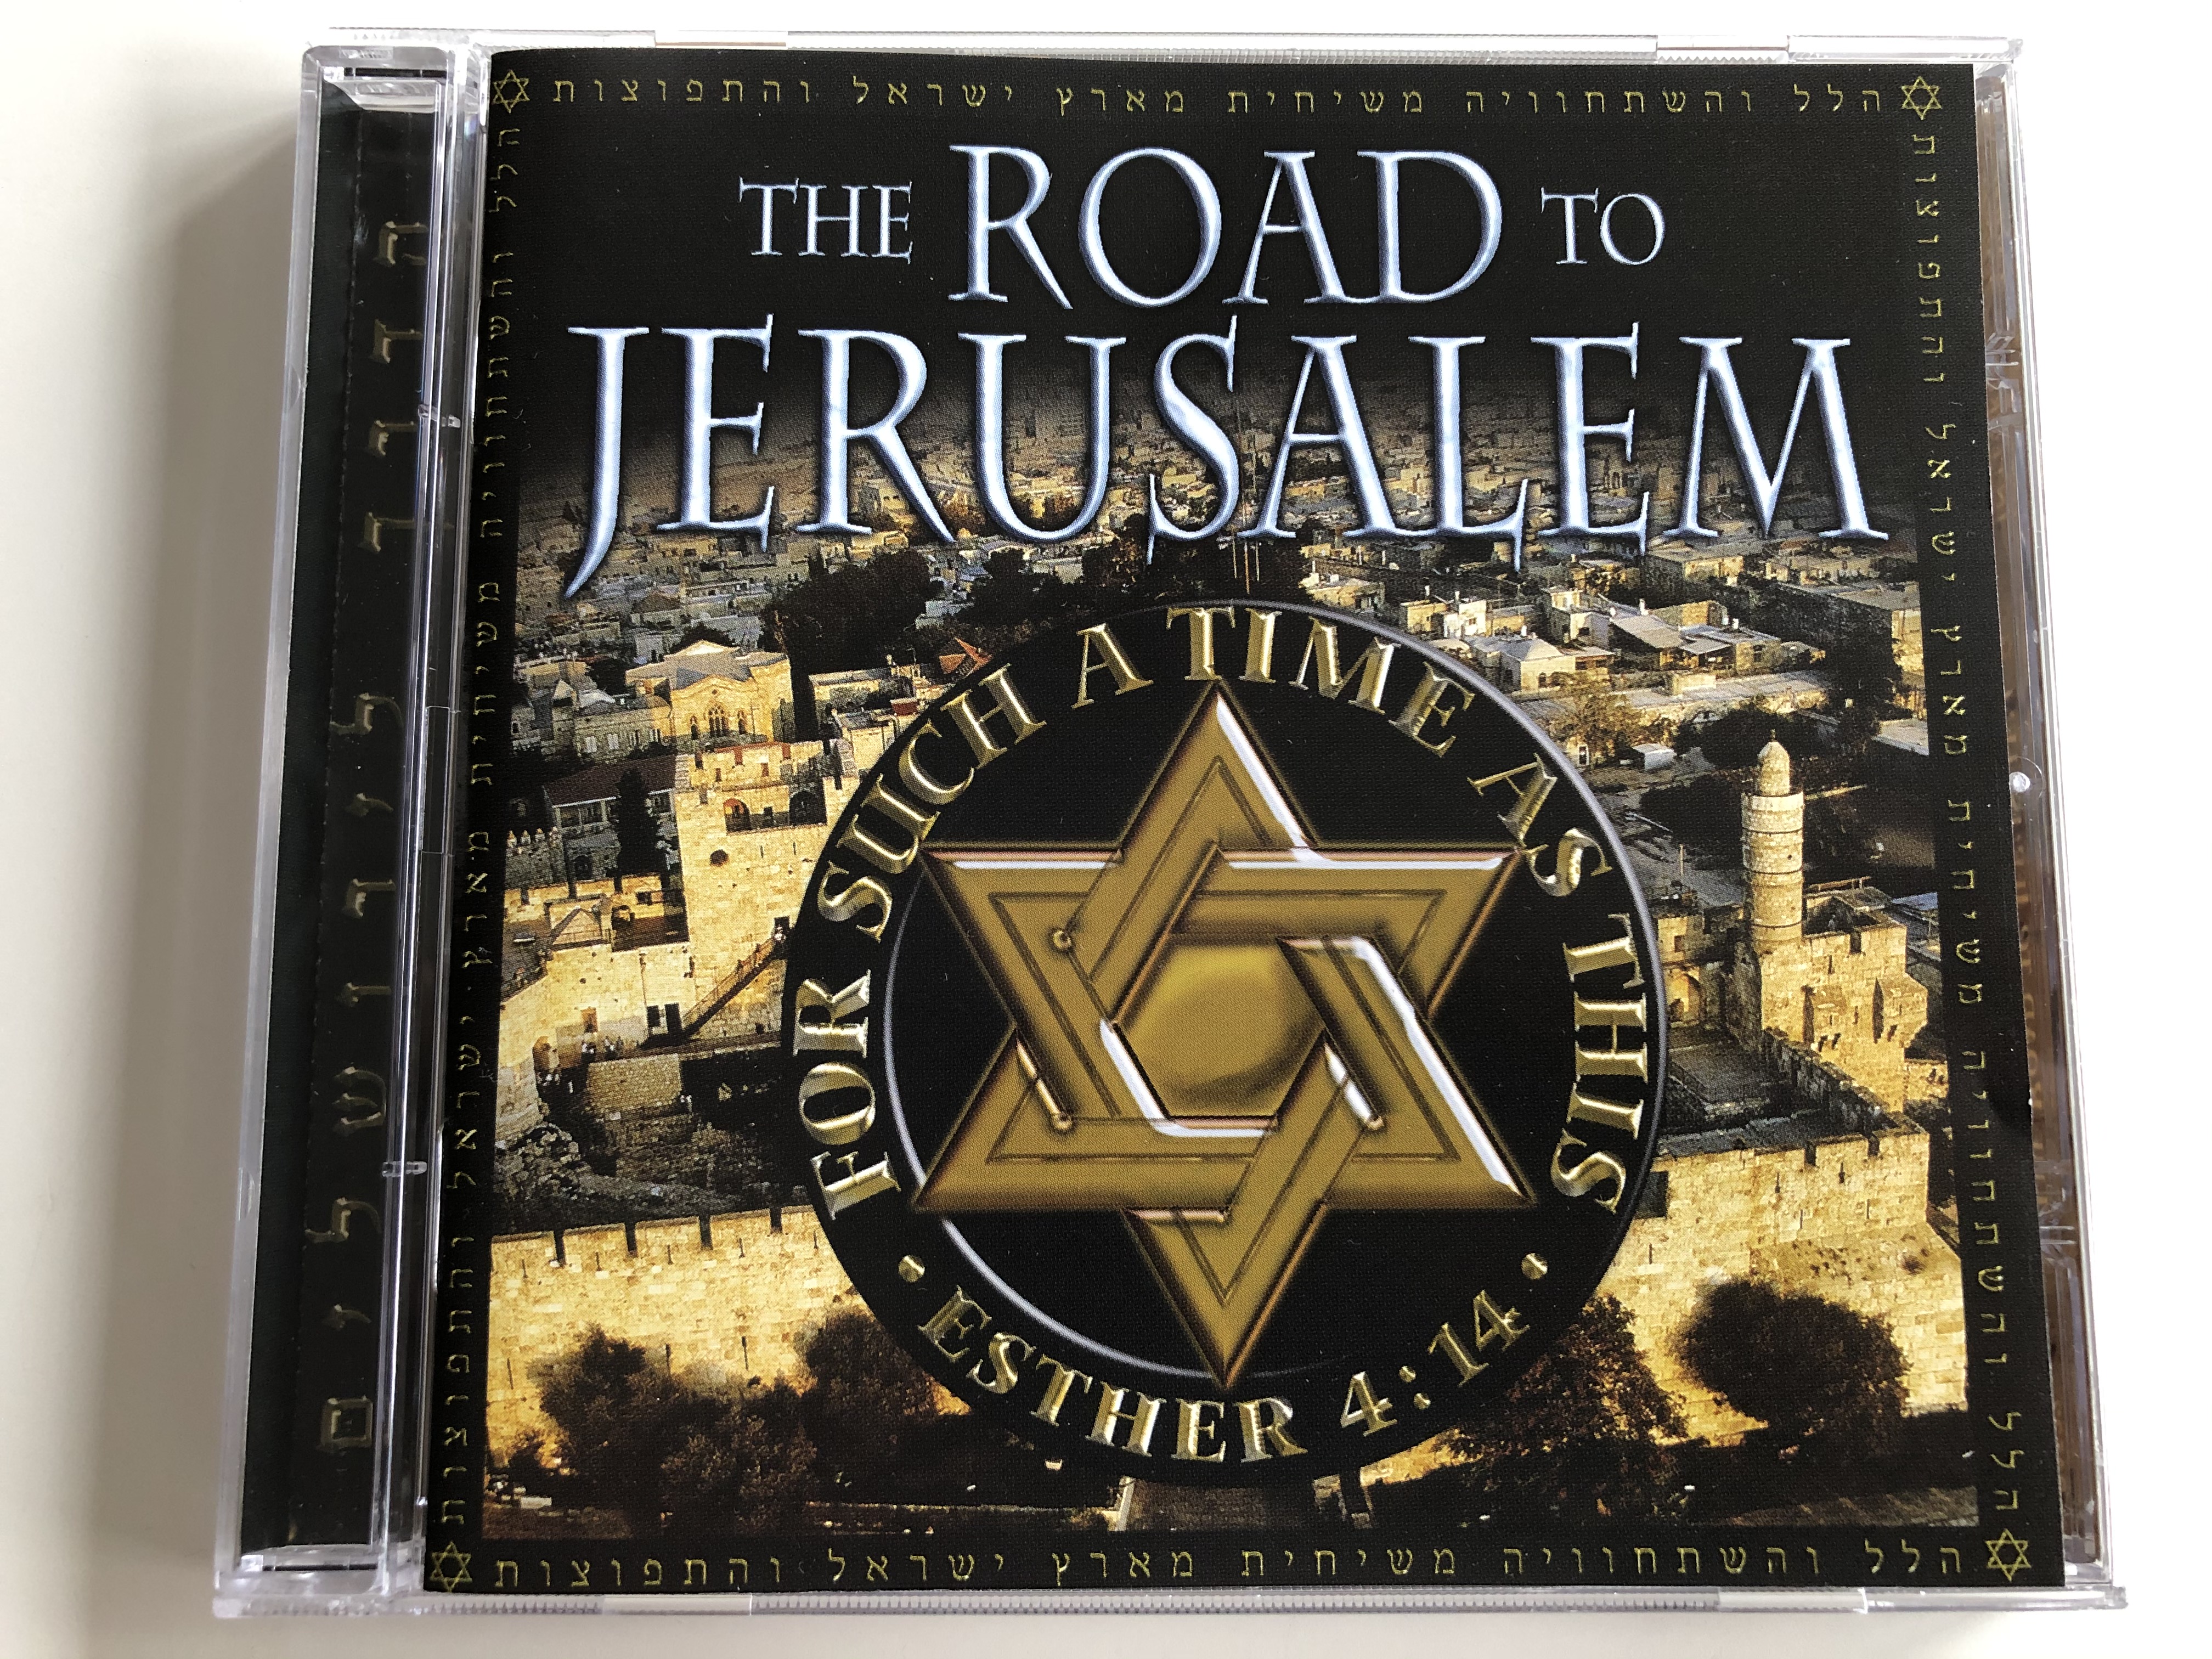 the-road-to-jerusalem-for-such-a-time-as-this-esther-414-mmv-galilee-of-the-nations-audio-cd-pwmsxx-1-.jpg